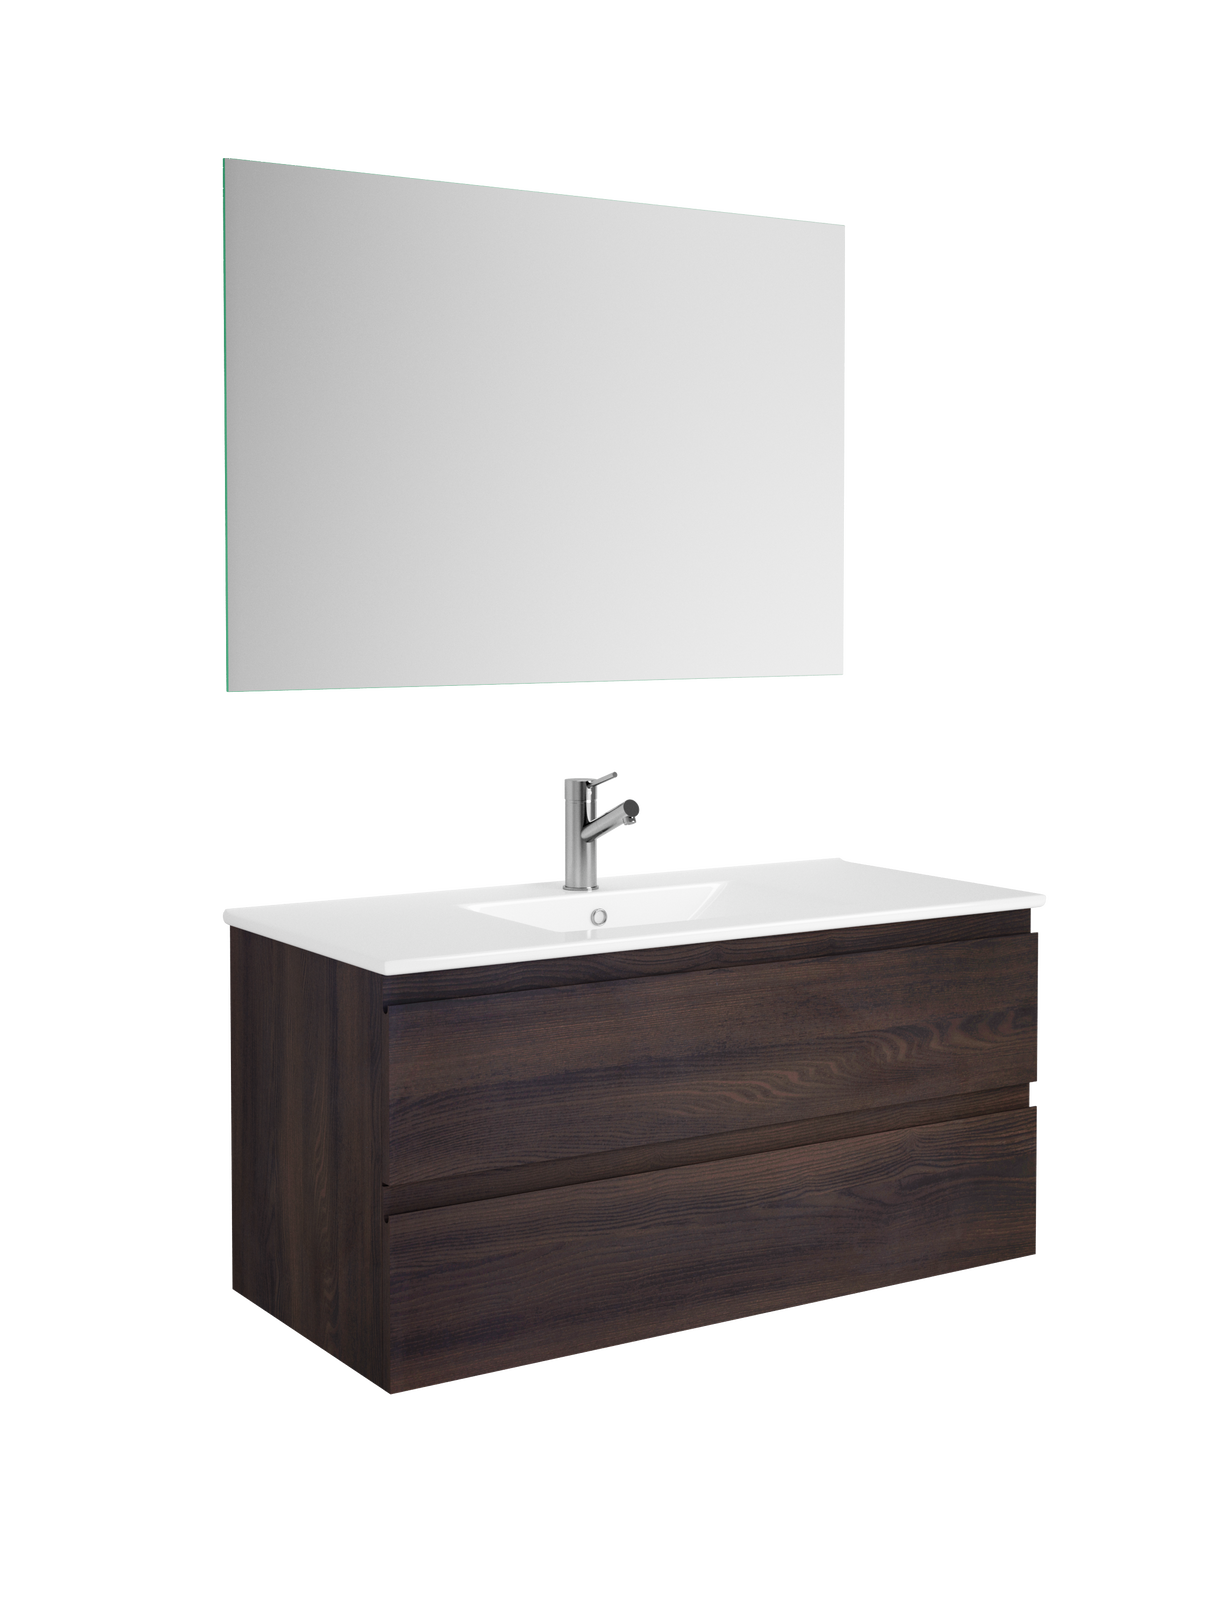 DAX Pasadena Engineered Wood and Porcelain Onix Basin with Vanity Cabinet, 40", Wenge DAX-PAS014013-ONX